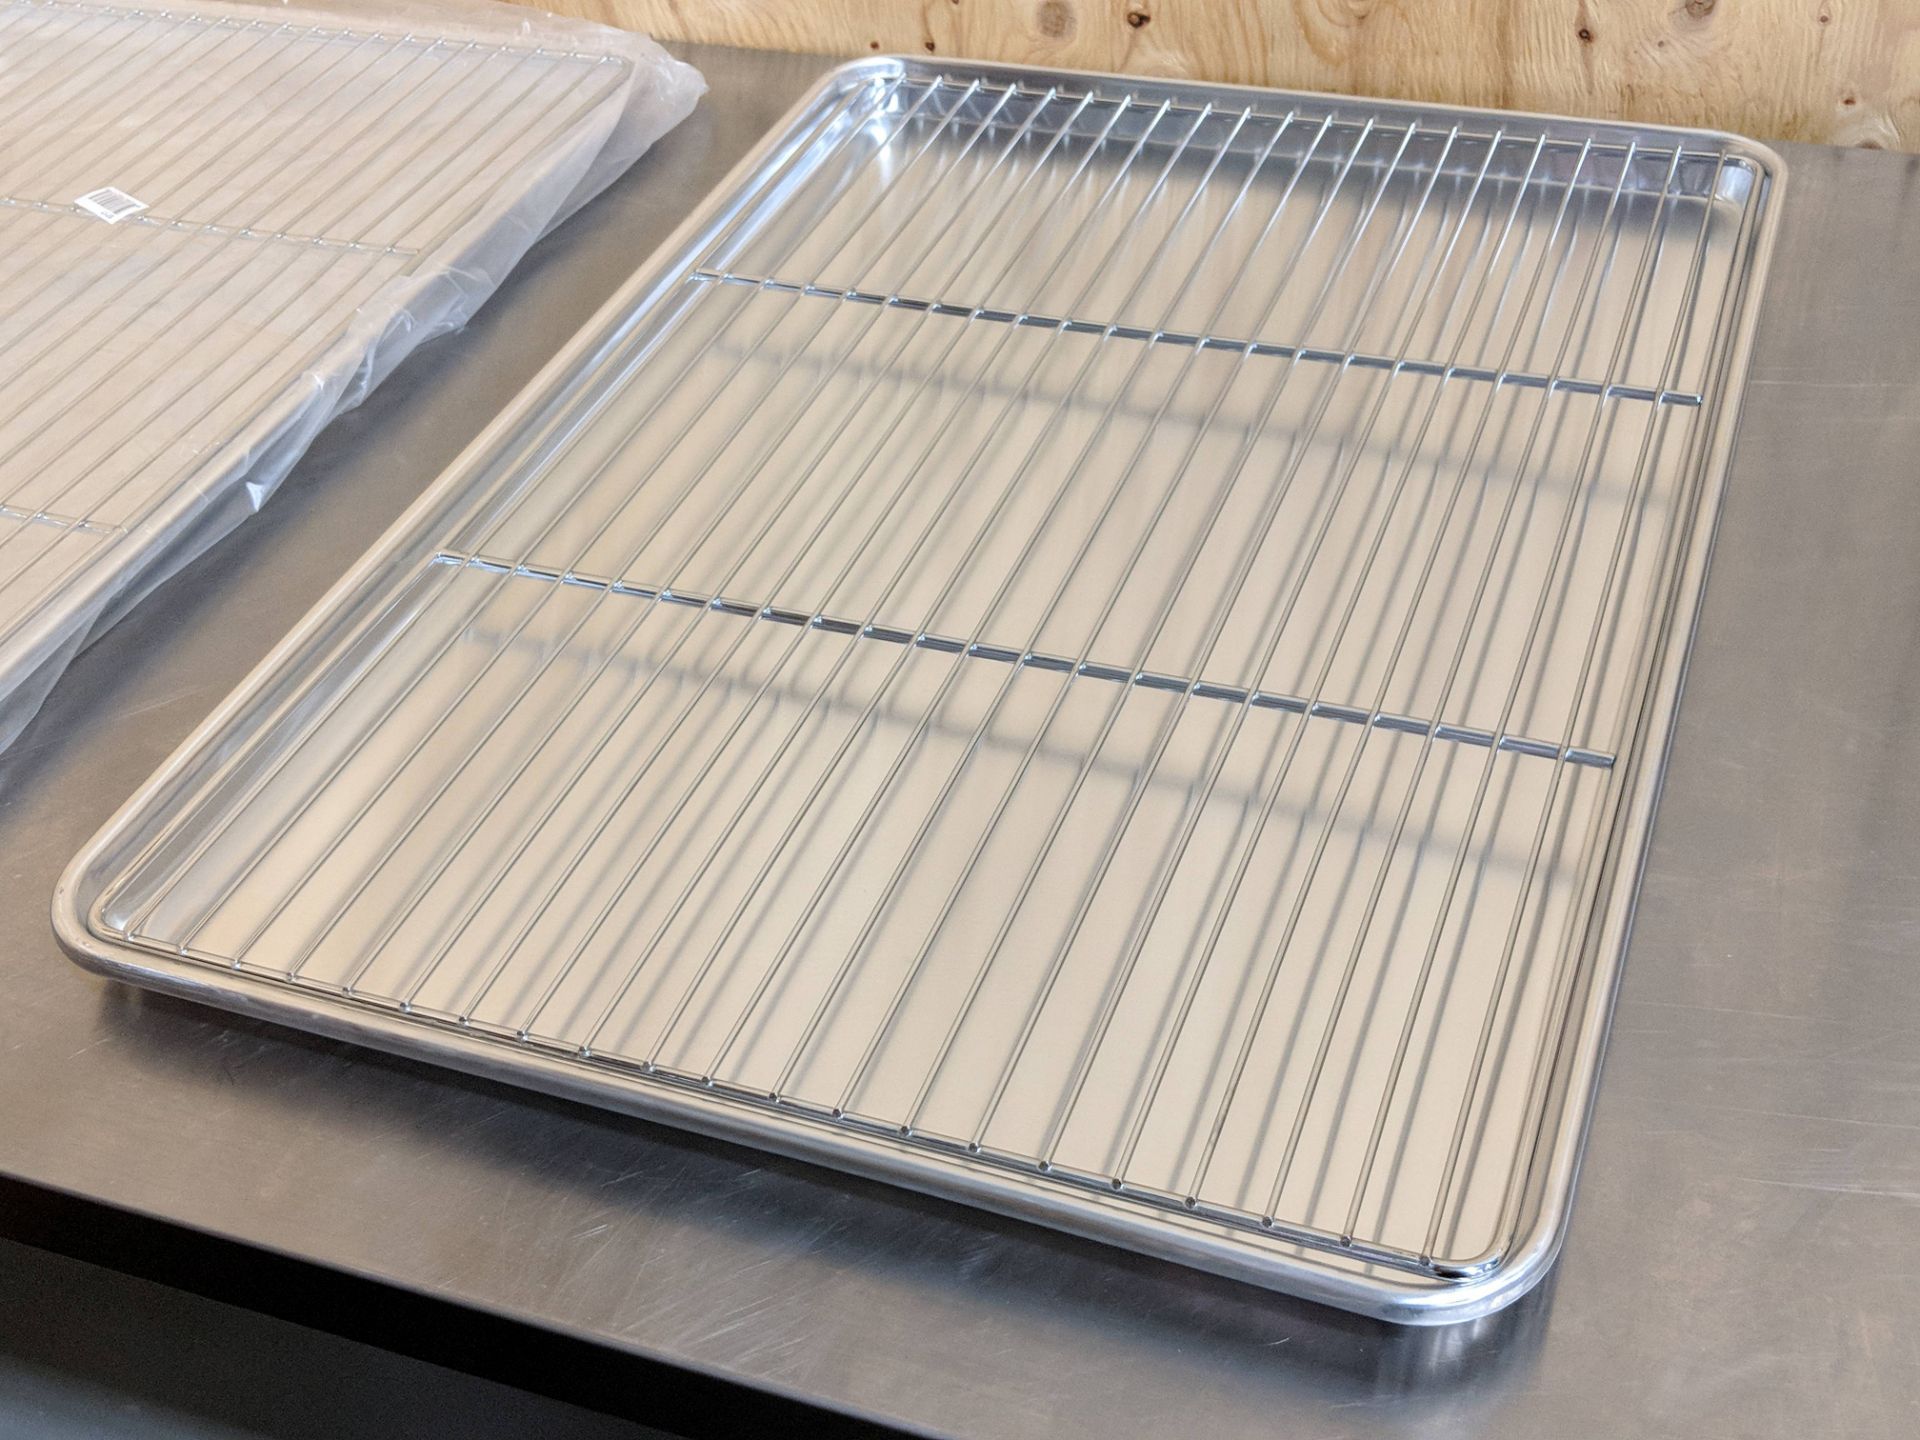 Full Size Bun Pan with Flat Stainless Rack - Lot of 2 Pieces